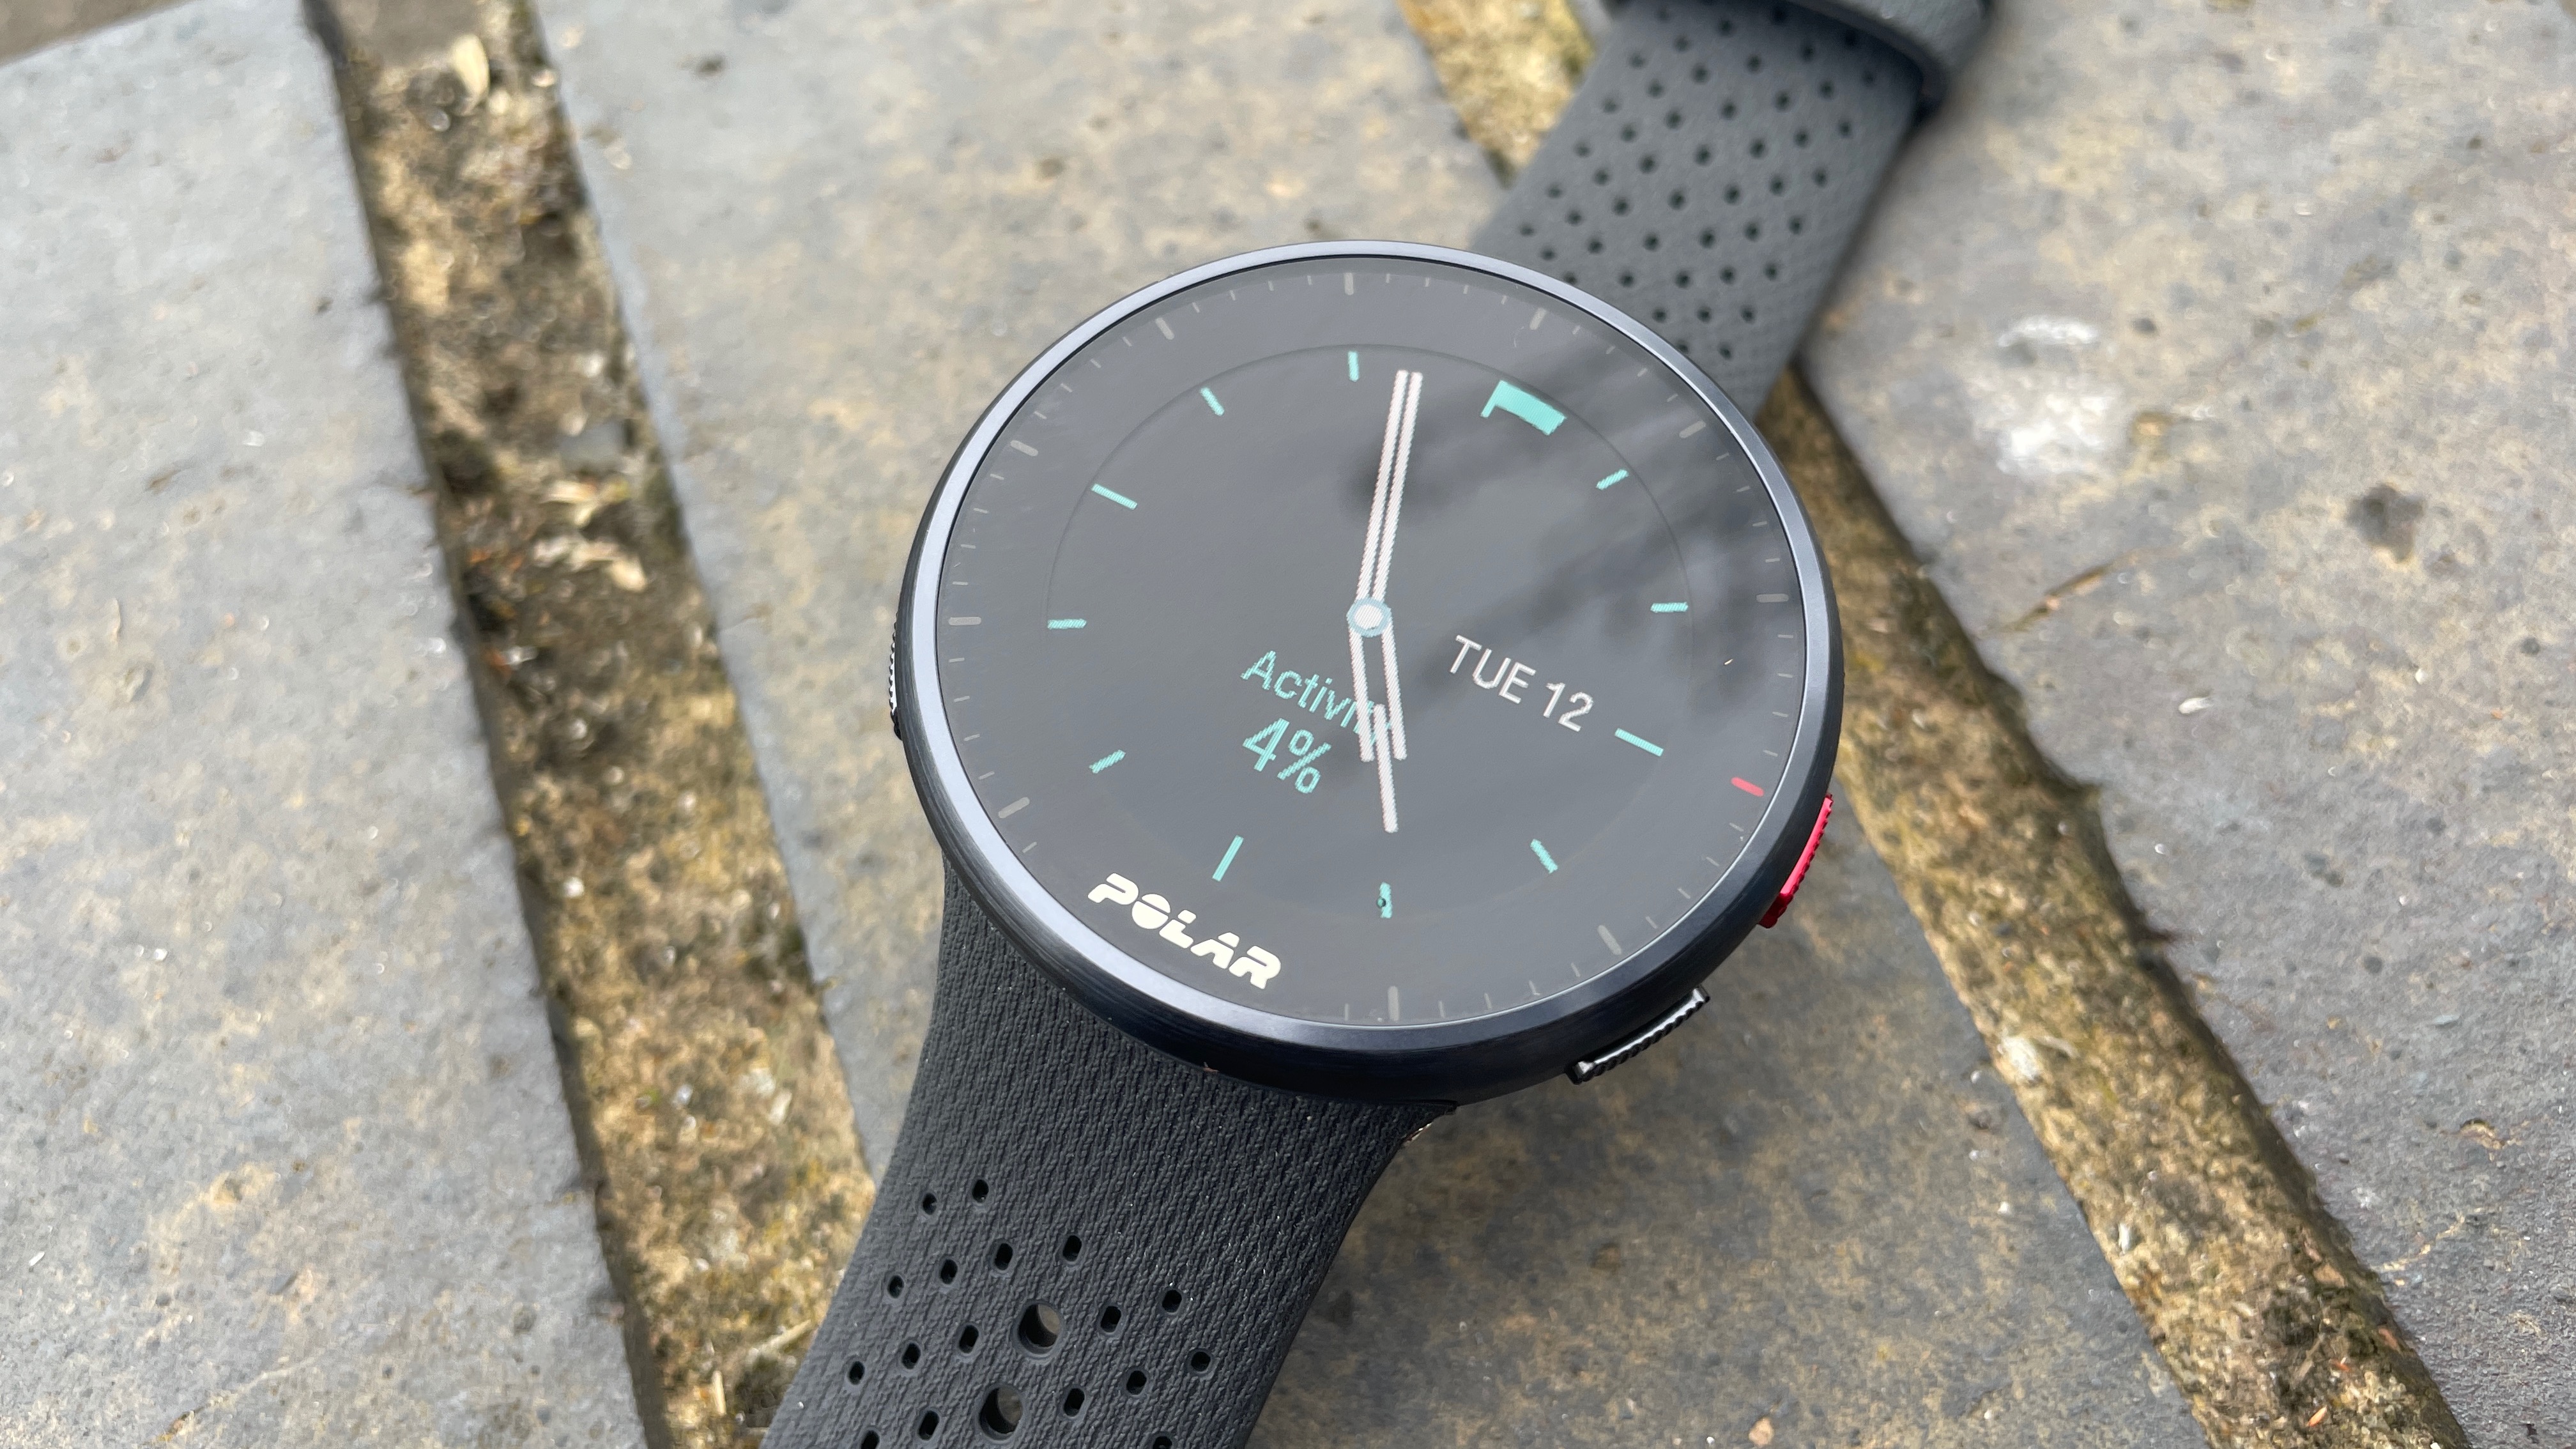 5 things I like about the Polar Pacer Pro GPS Watch